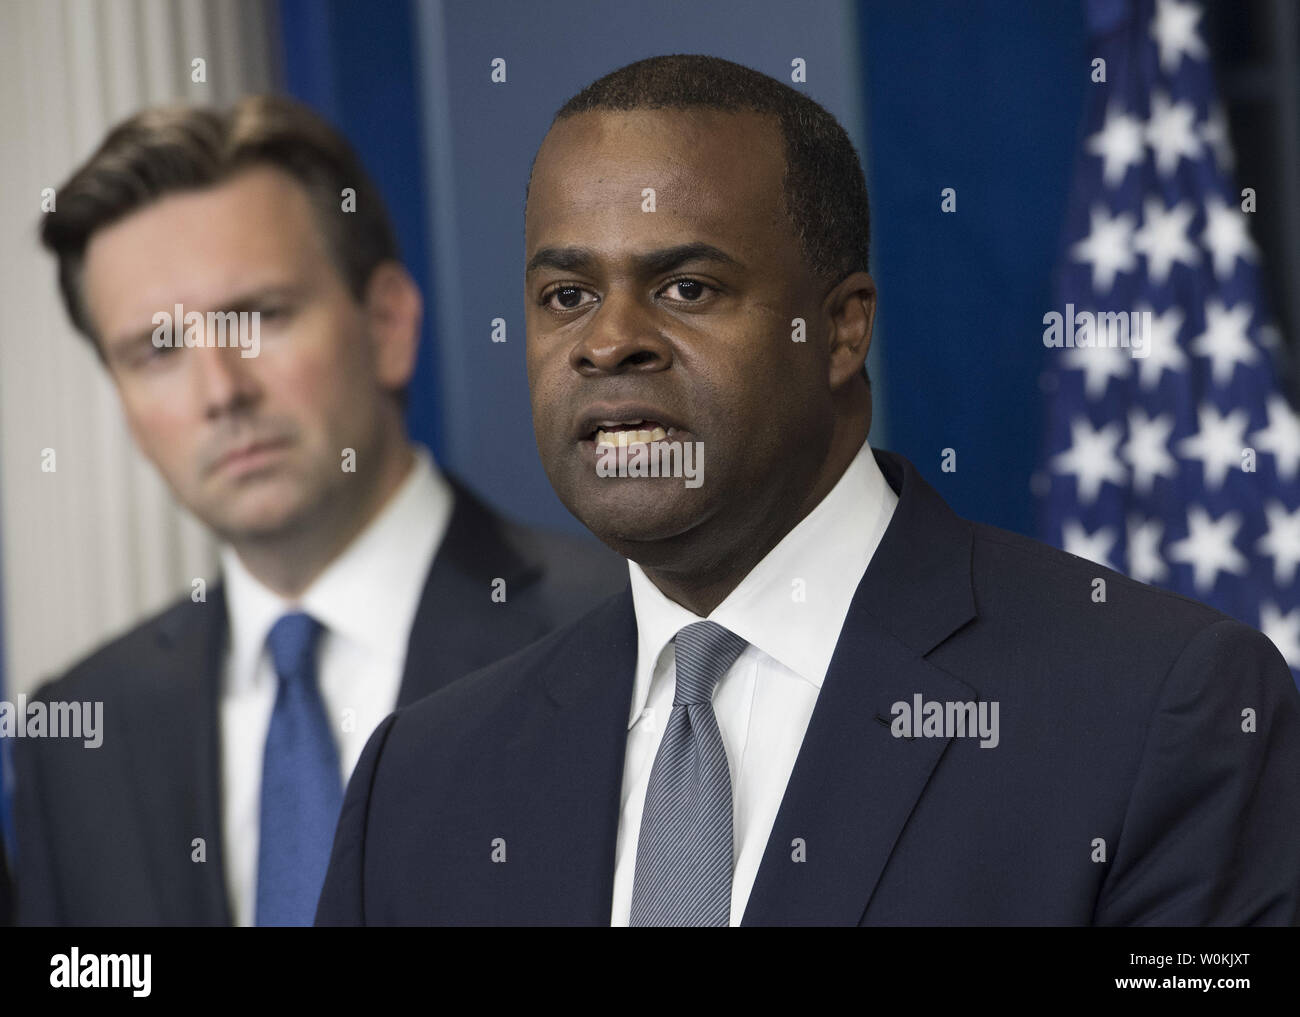 Atlanta Mayor Kasim Reed, joined by White House Press Secretary Josh Earnest, speaks to the press on the Trans-Pacific Partnership following a meeting with President Barack Obama at the White House in Washington, D.C. on September 16, 2016. Photo by Kevin Dietsch/UPI Stock Photo